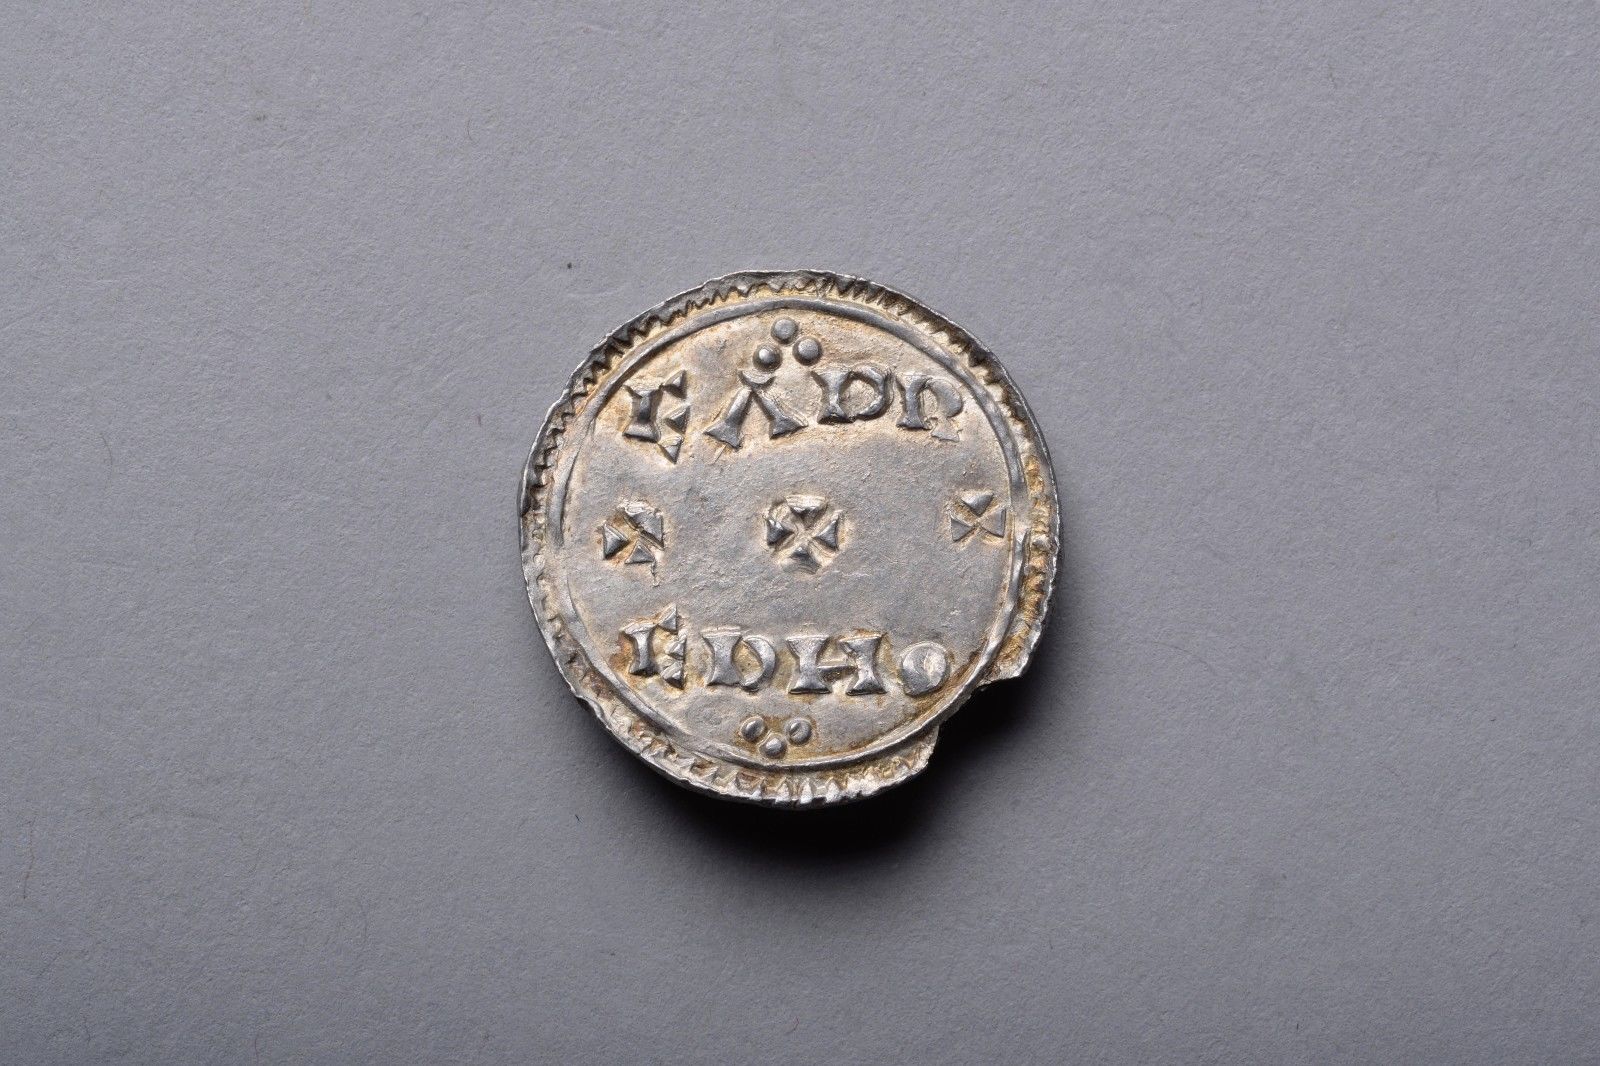 Unique Anglo Saxon Silver Penny Coin of King Eadred of Wessex - 899 AD